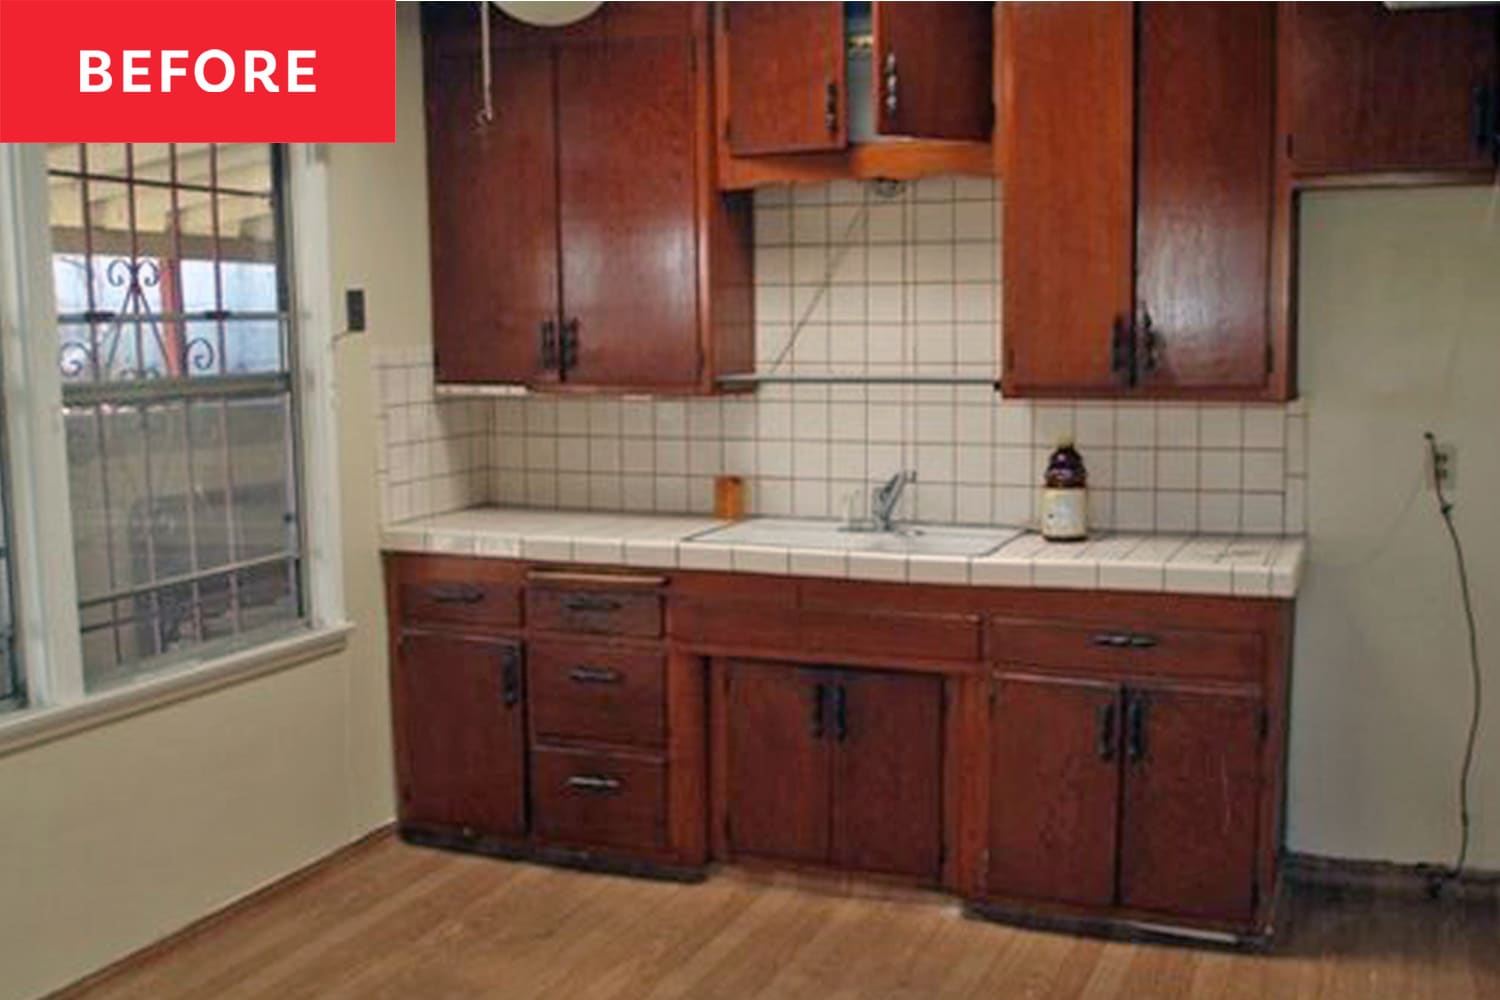 See How Colorful 1960s Cabinets Revive a “Falling Apart” Kitchen